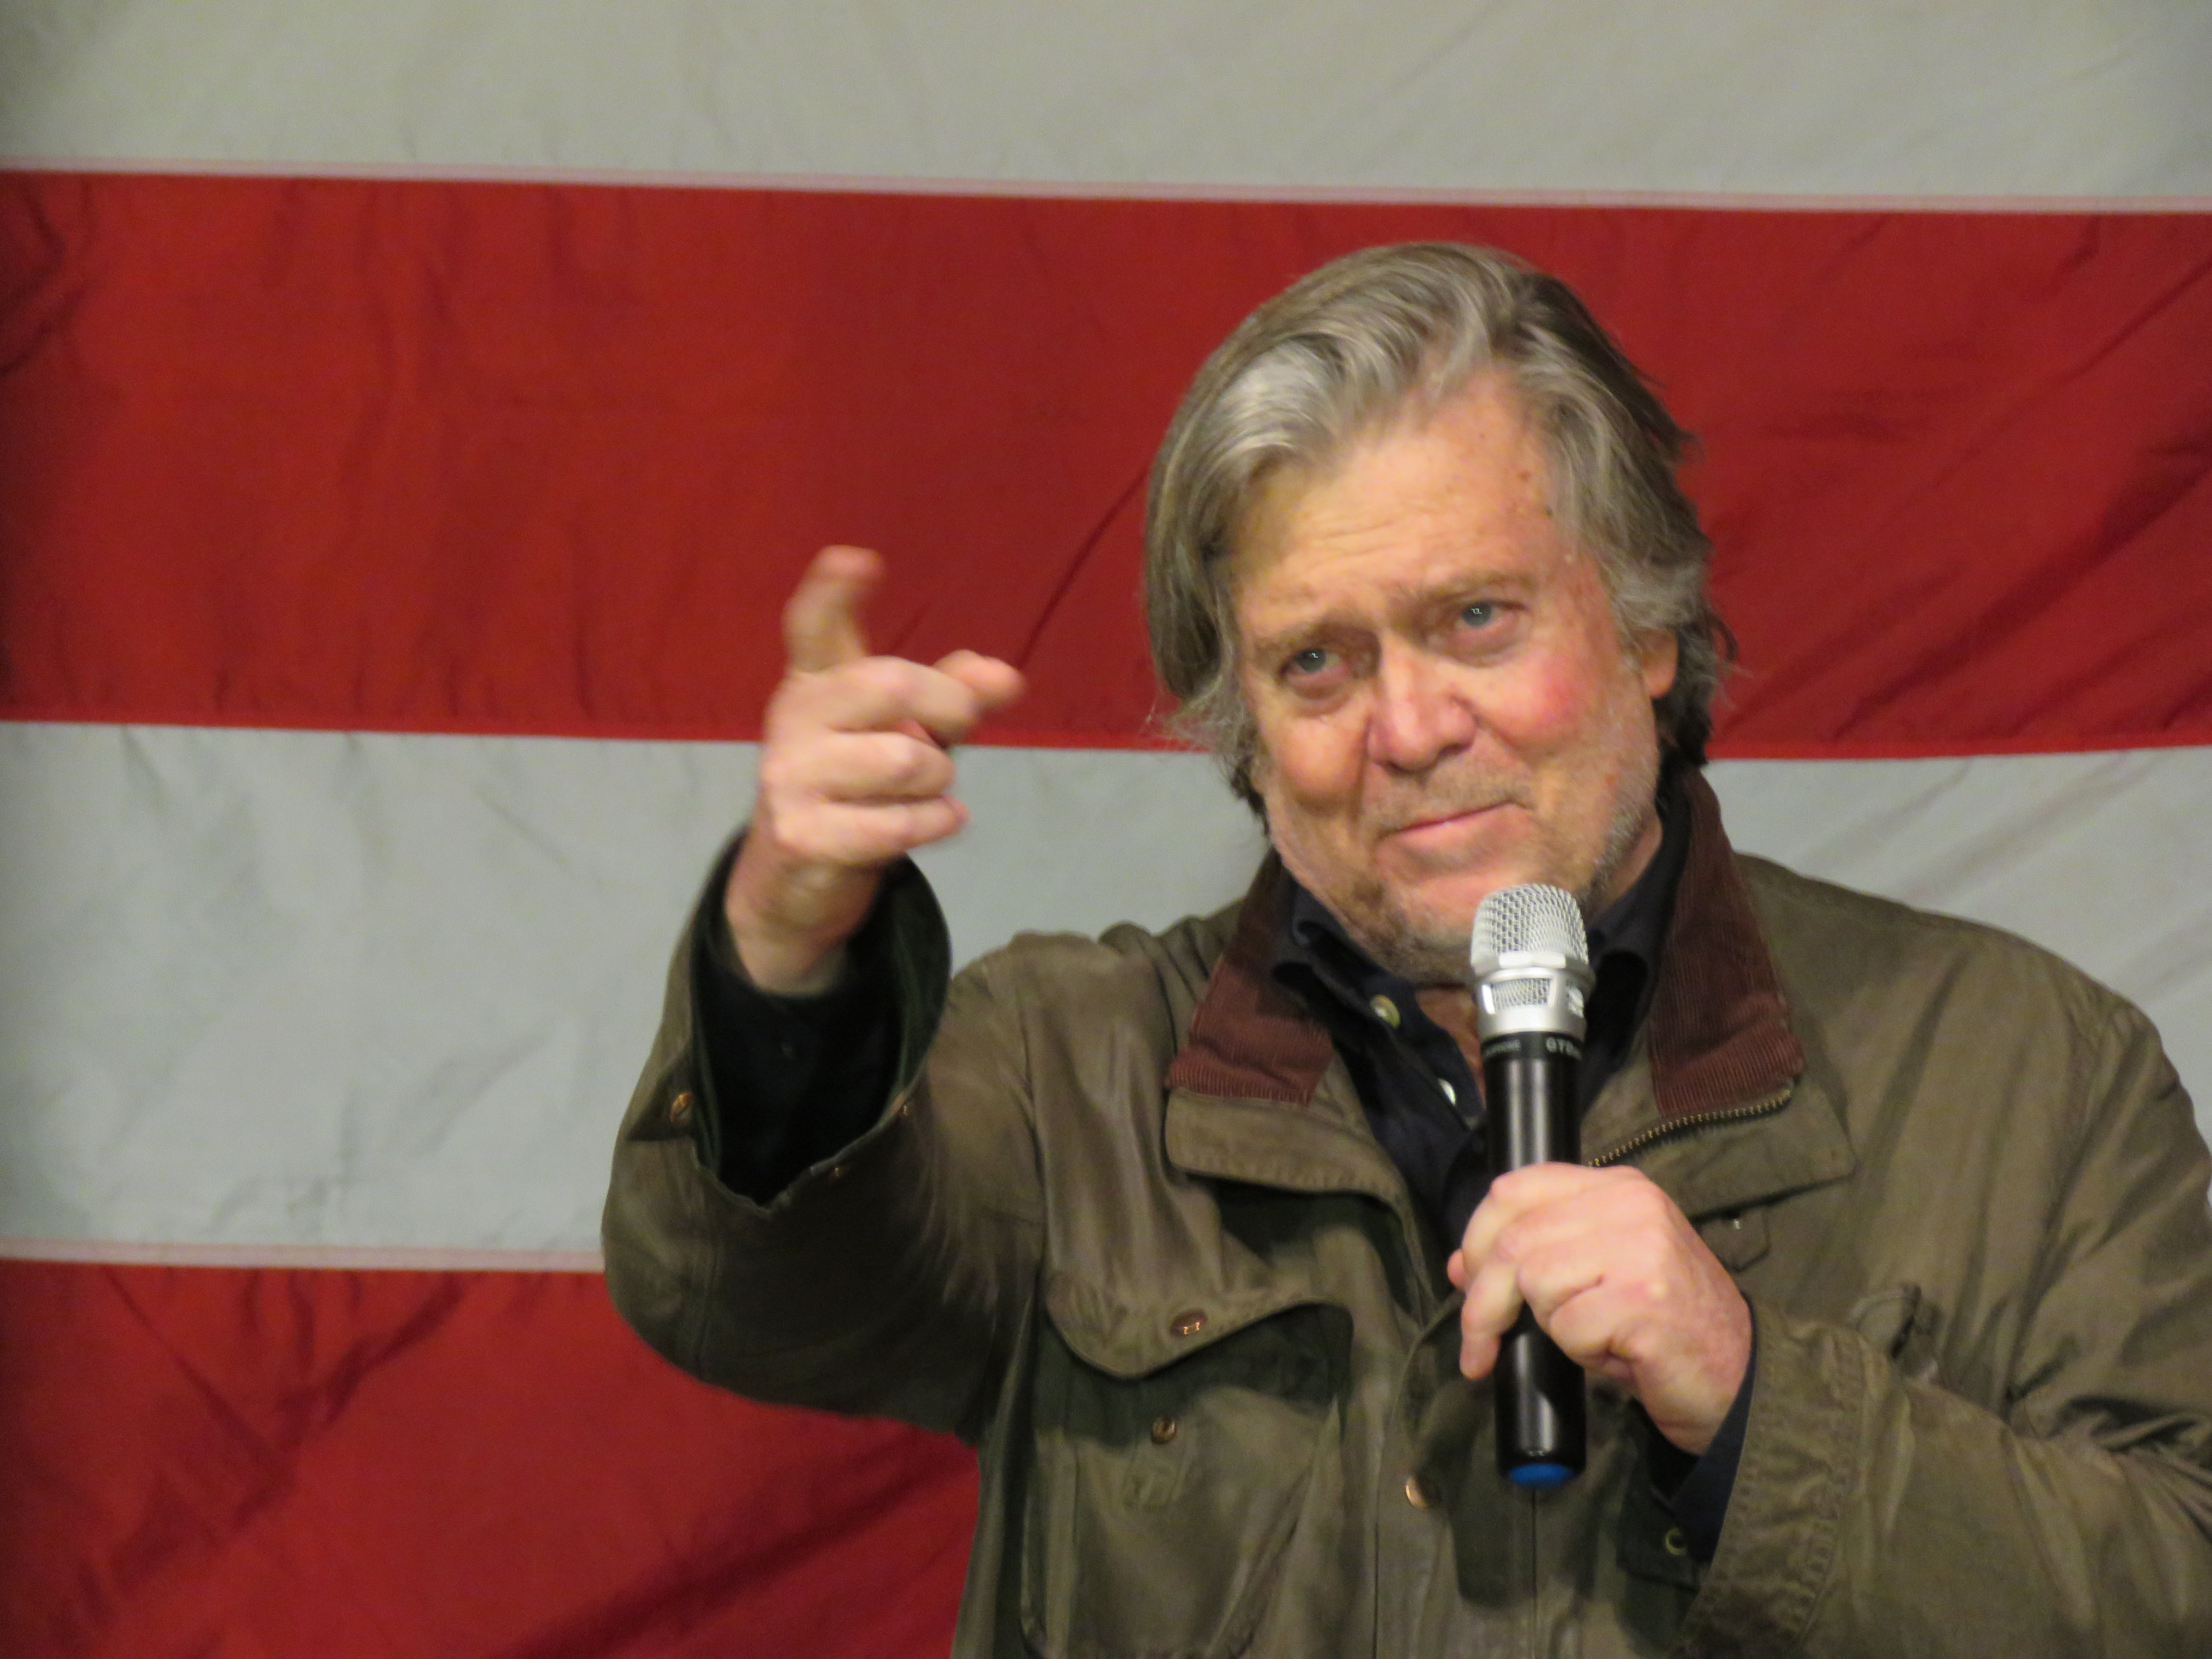 Steve Bannon Fairhope3b - Sloppy Steve Bannon Arrested and Charged with Fraud for Bilking Trump Supporters out of $25 Million for 'We Build the Wall' Campaign